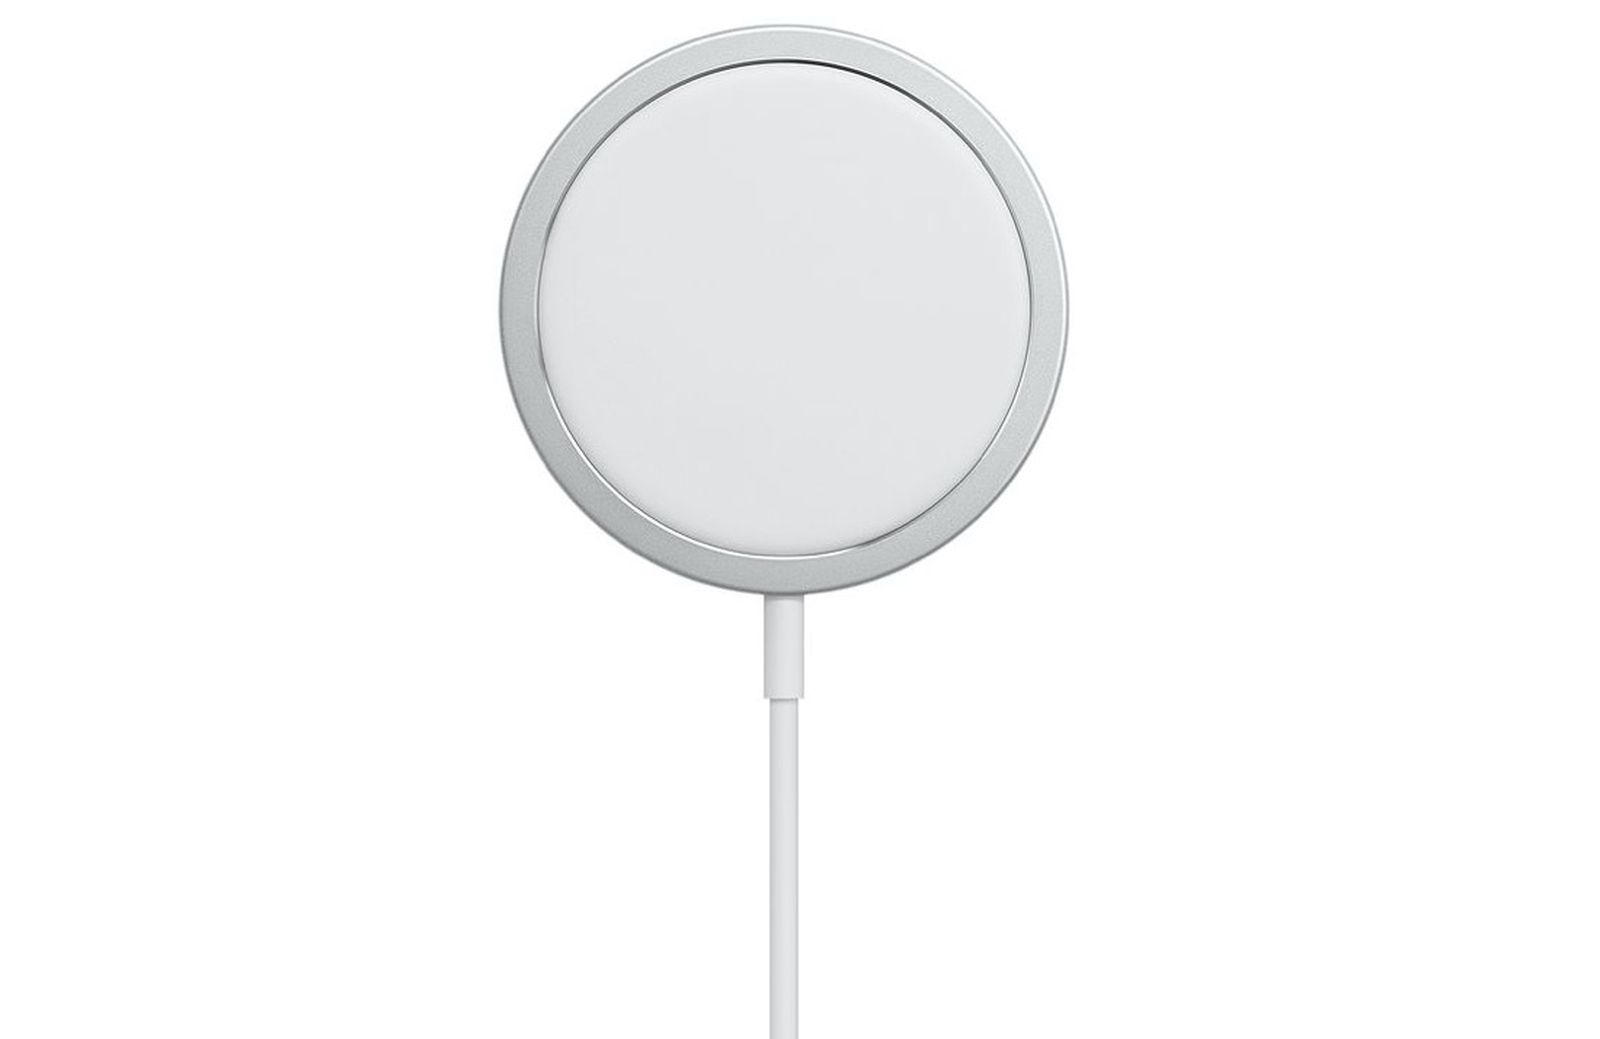 Apple S New Magsafe Charger Offers 15w Charging Qi Still Limited To 7 5w Macrumors